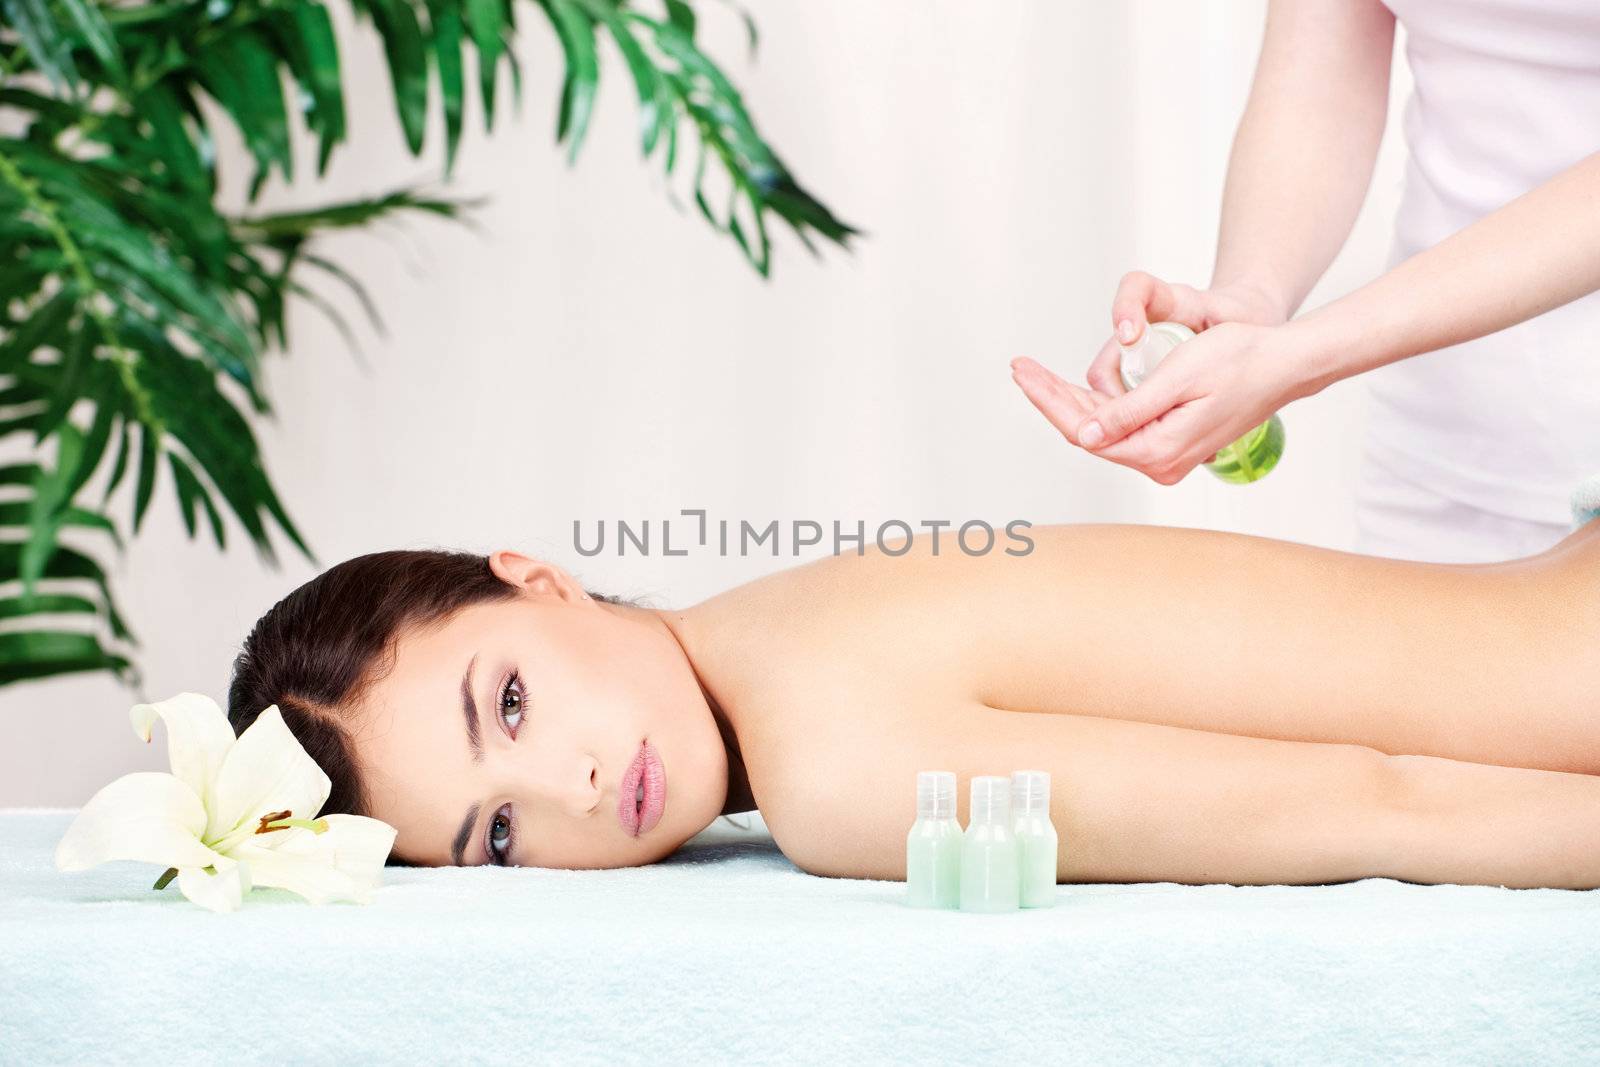 Lovely lady getting a back massage